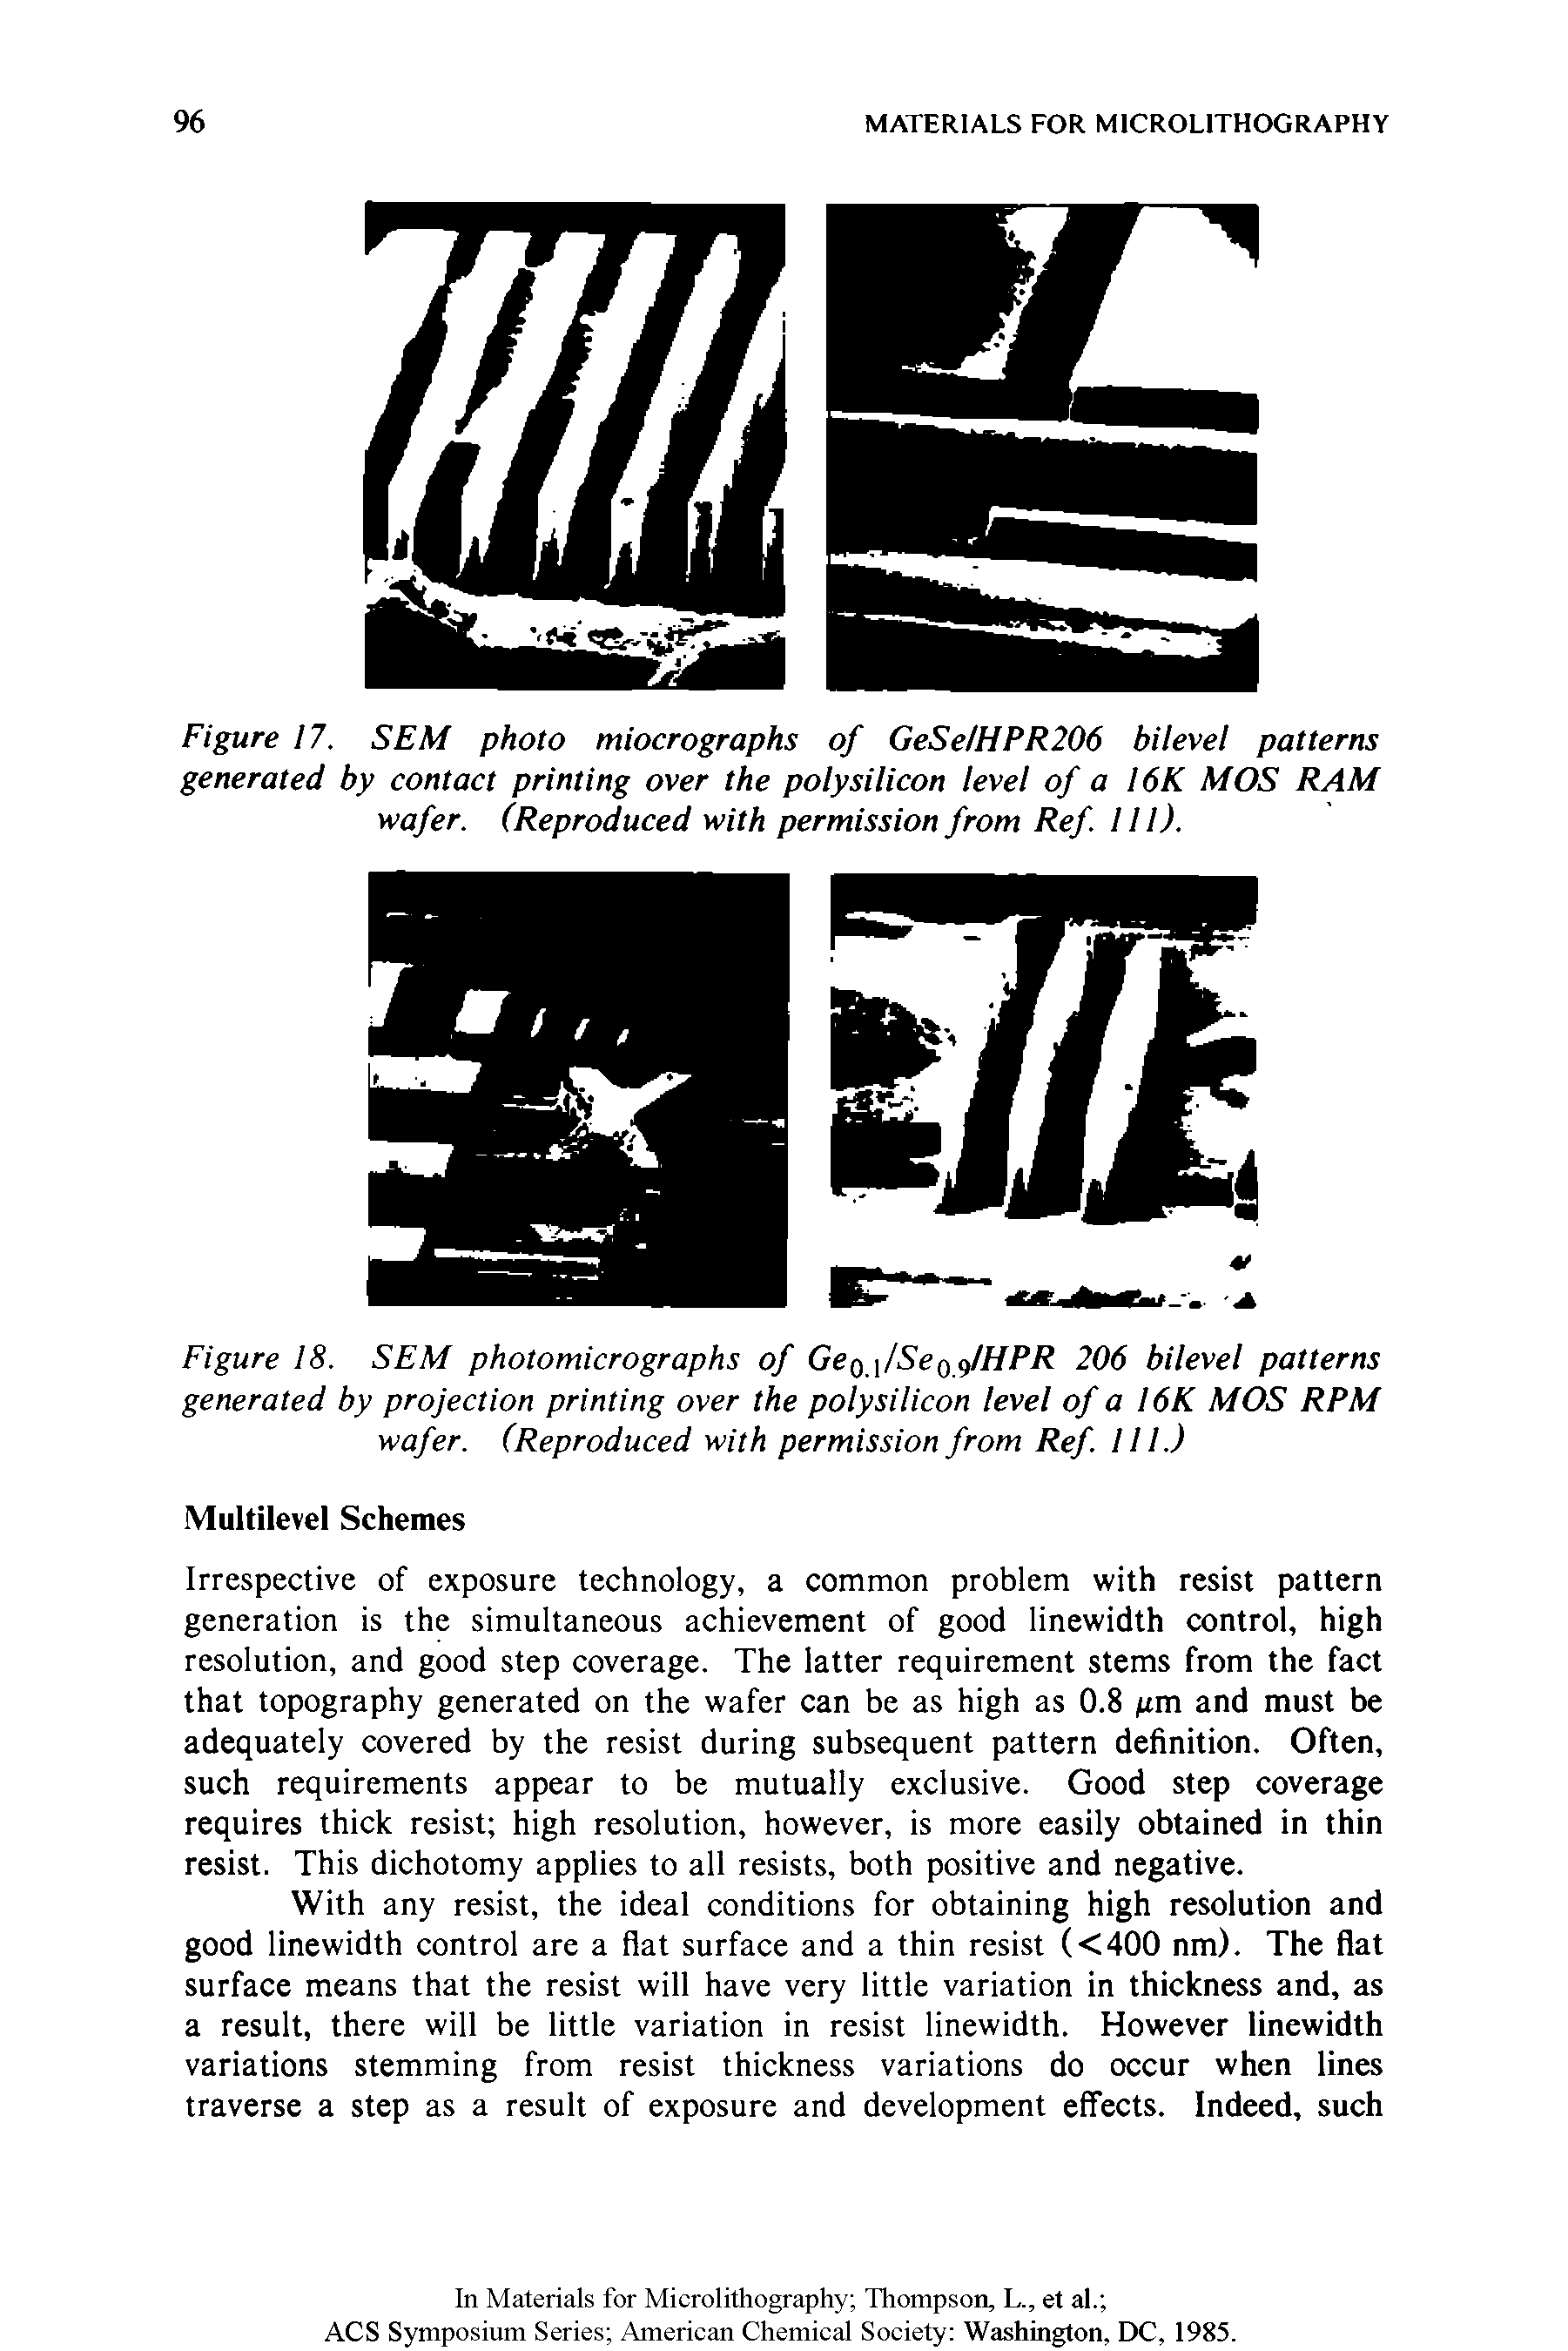 Figure 18. SEM photomicrographs of Geo /Se0 9/HPR 206 bilevel patterns generated by projection printing over the poly silicon level of a 16K MOS RPM wafer. (Reproduced with permission from Ref. 111.)...